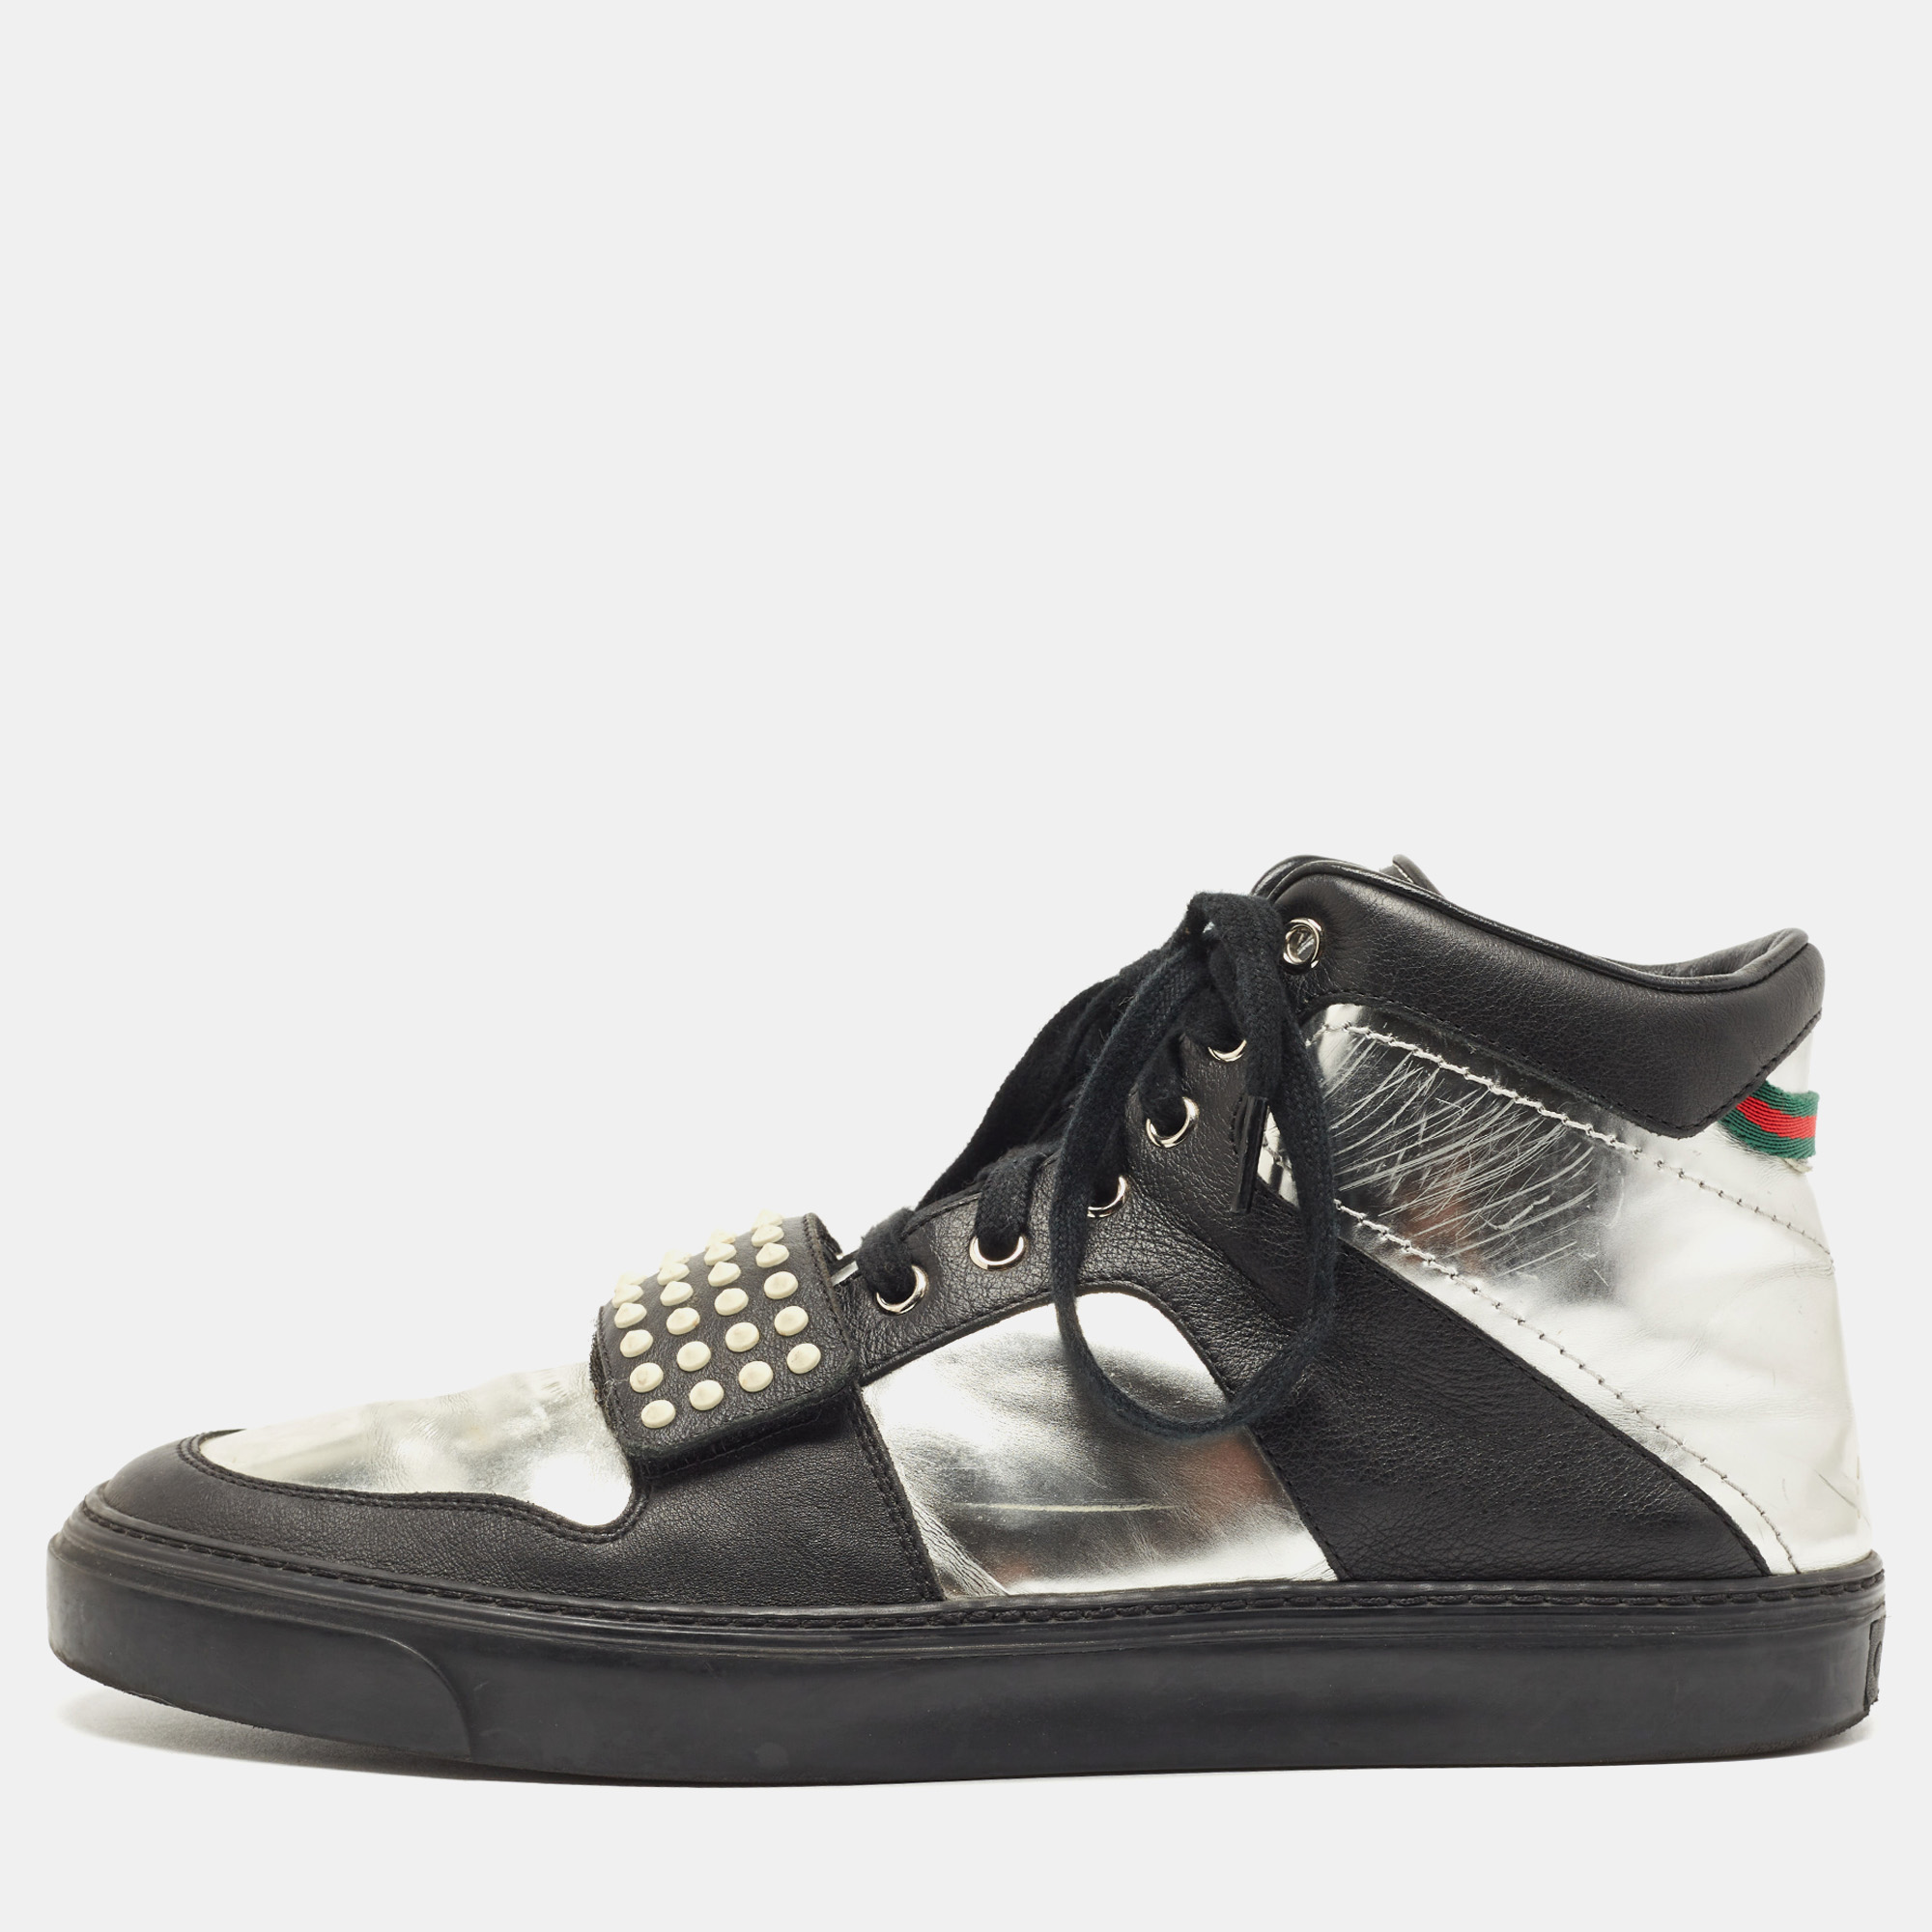 Pre-owned Gucci Black/silver Leather Ayoyo High Top Sneakers Size 43.5